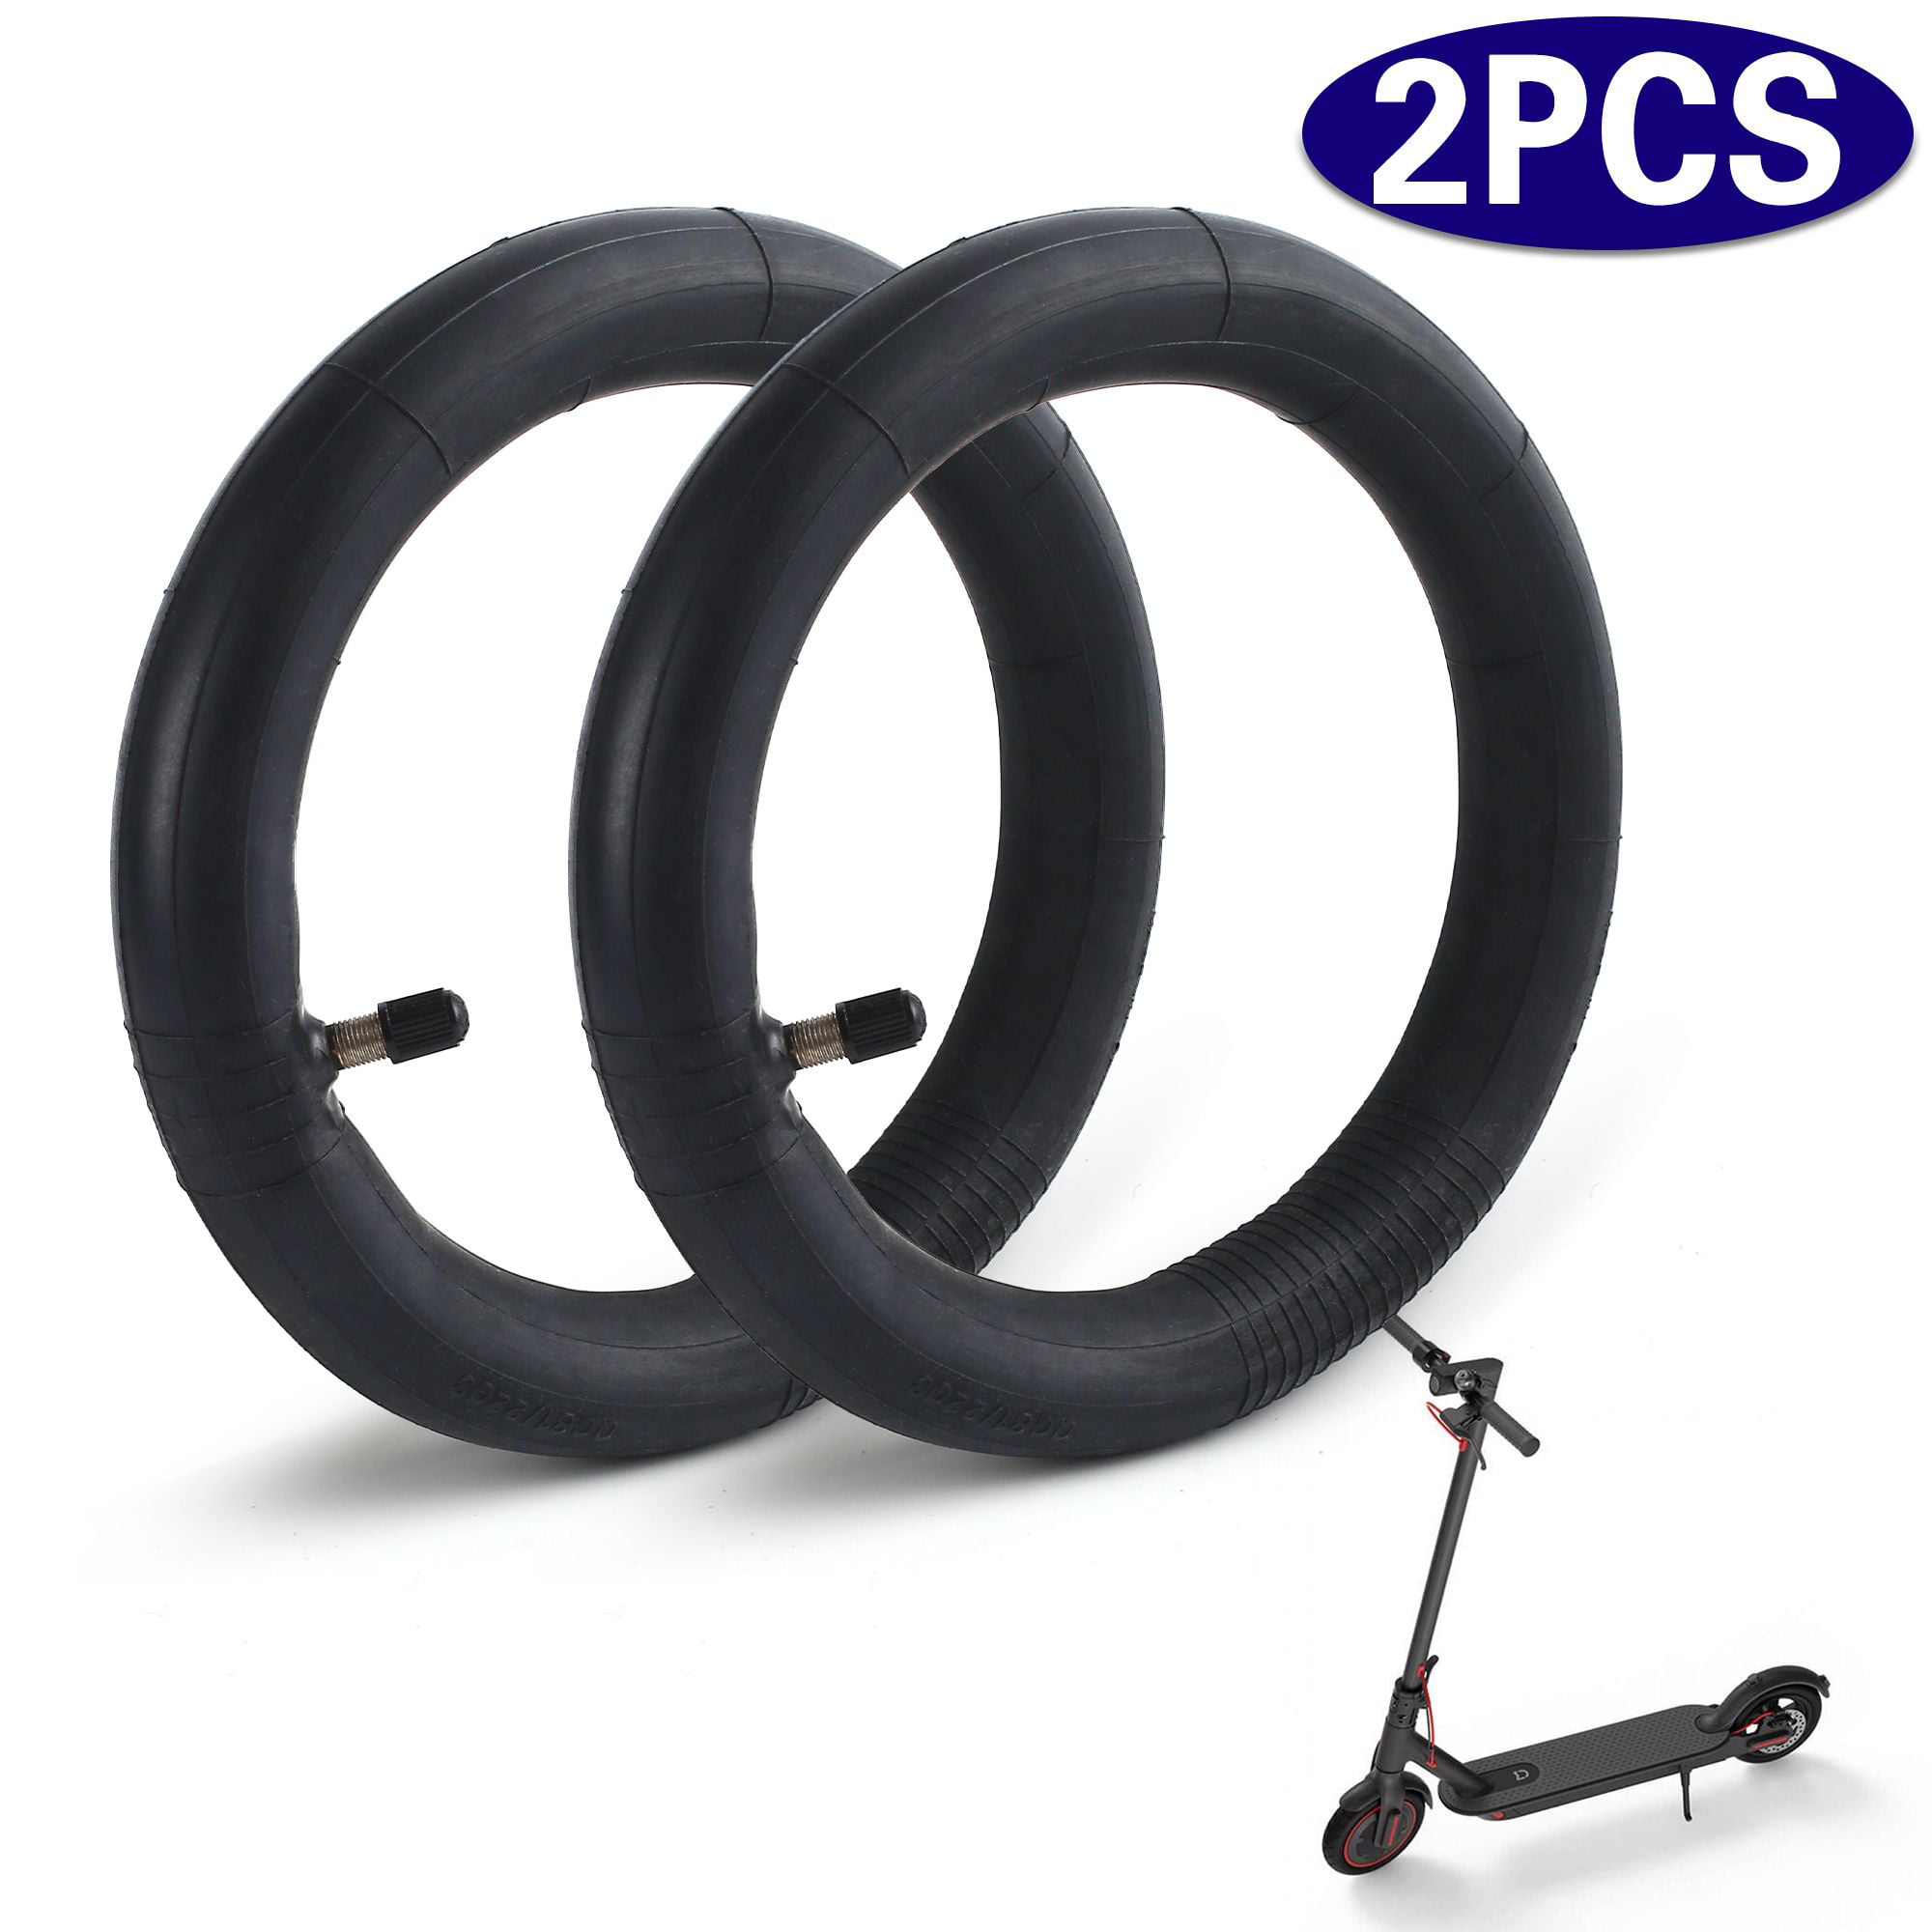 2 x Xiaomi M365 Tyre and Inner Tube for Electric Scooter 8.5 inch X 2 inch 